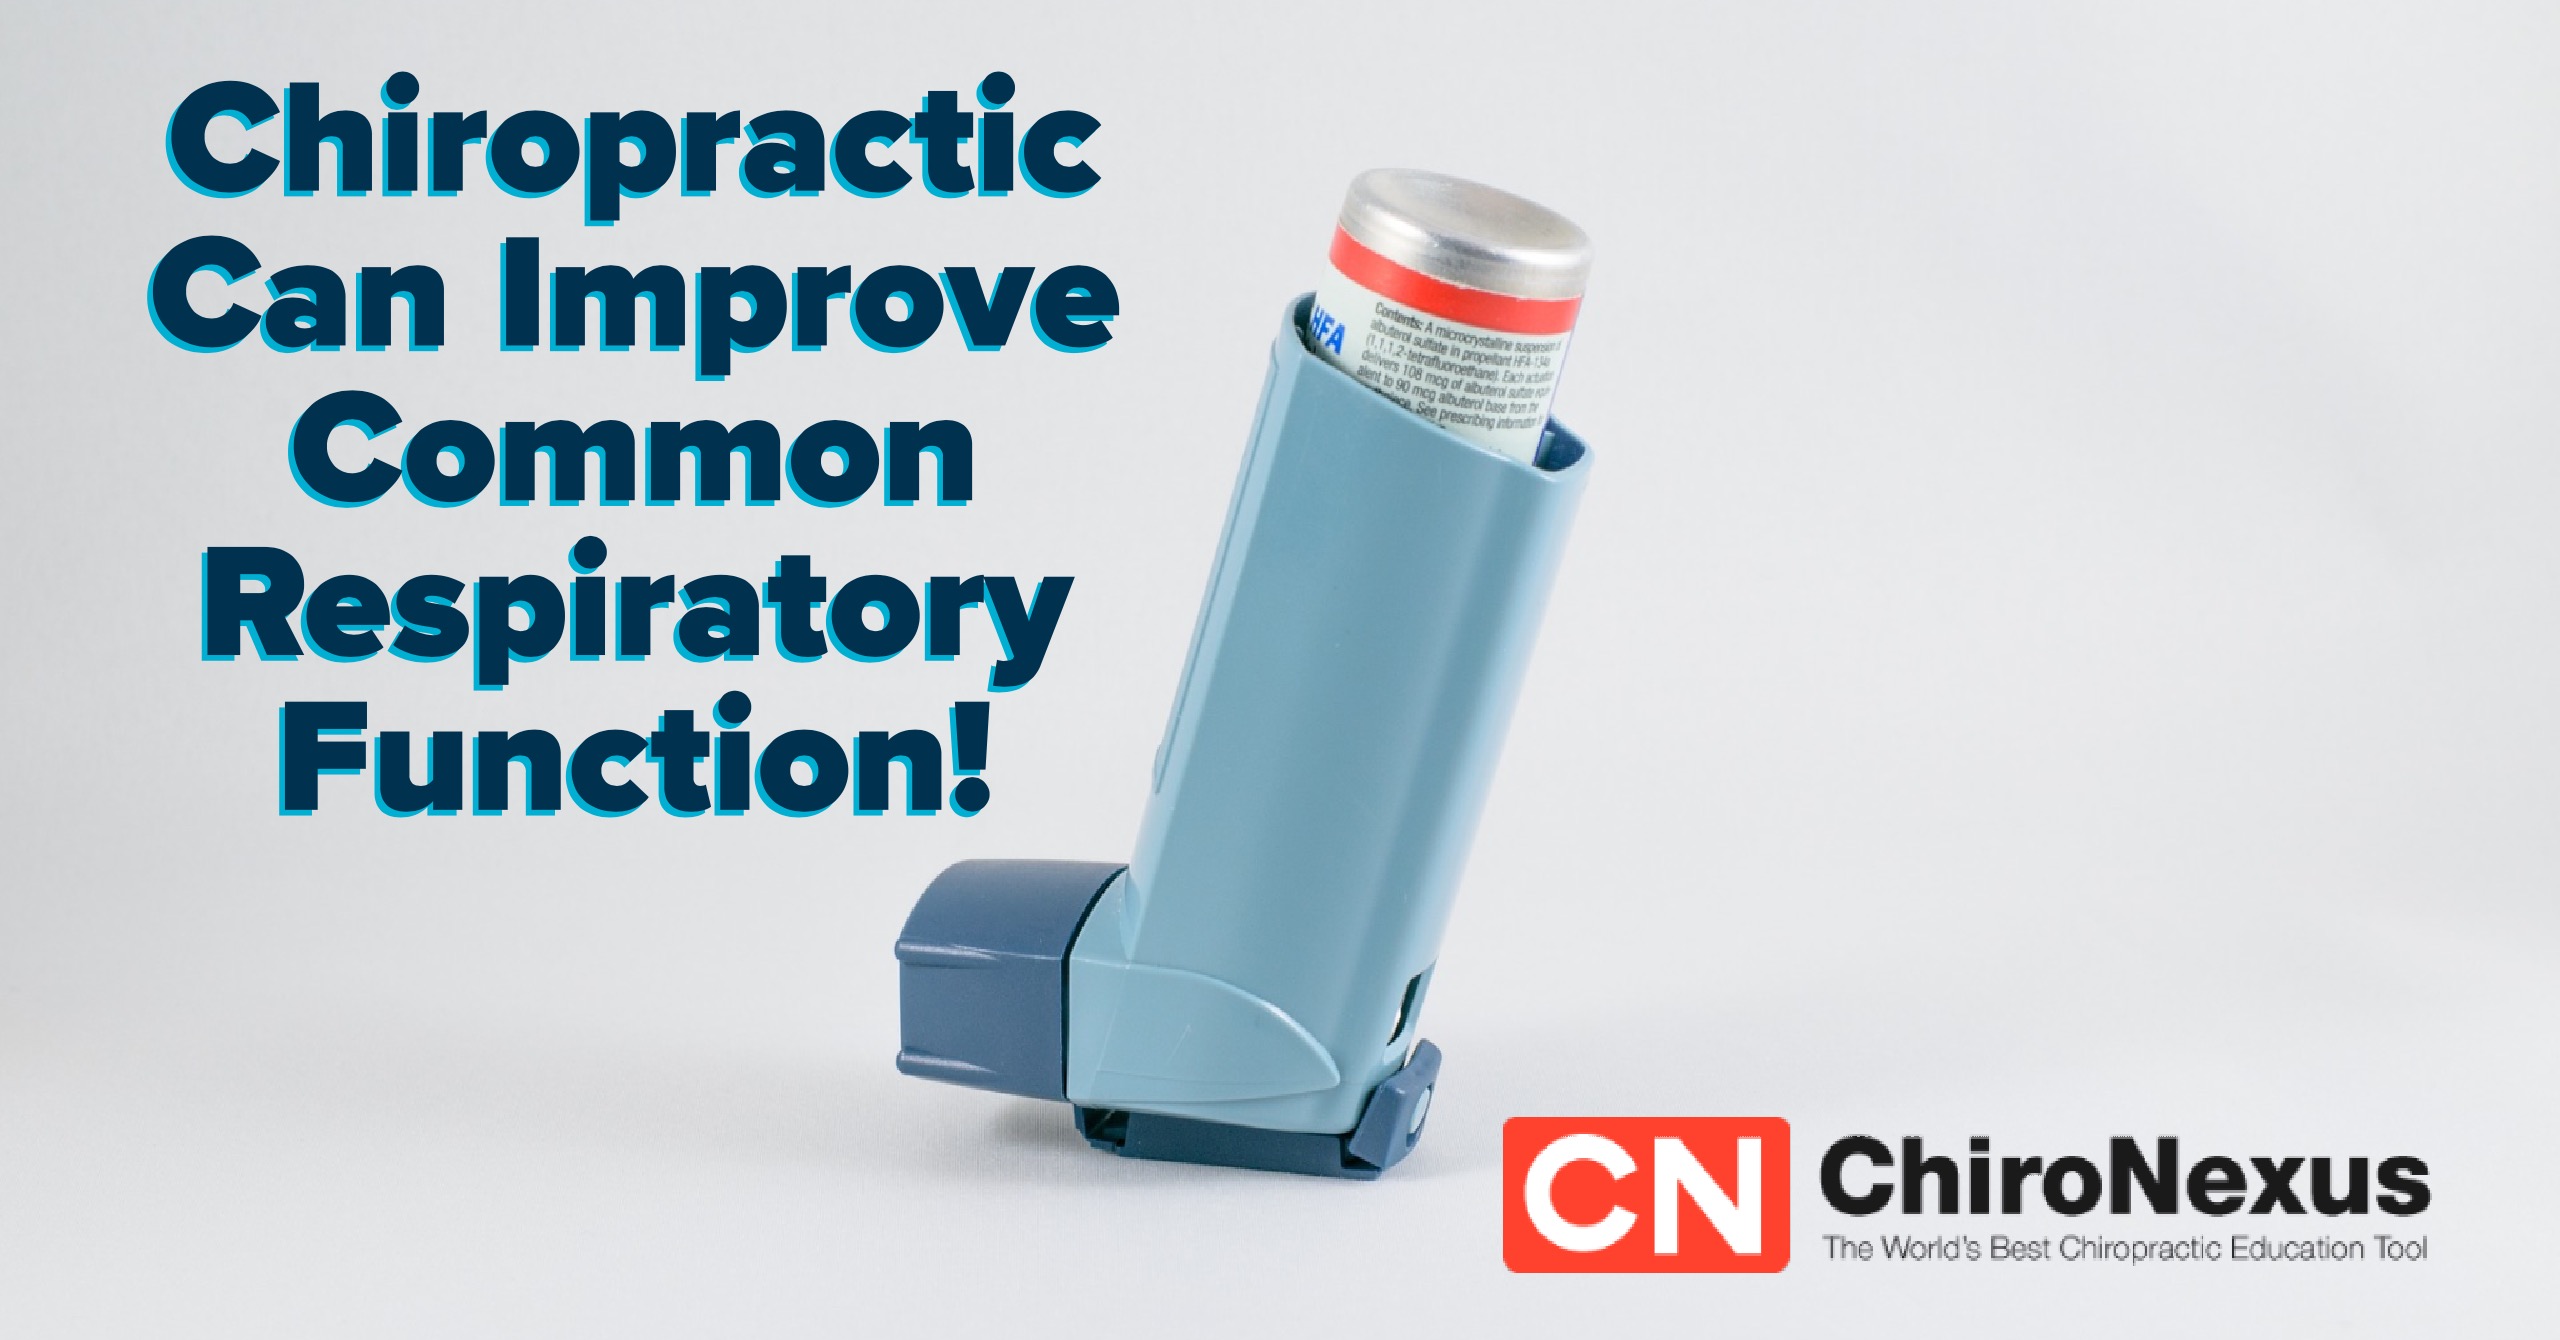 Chiropractic Care Can Improve Respiratory Function